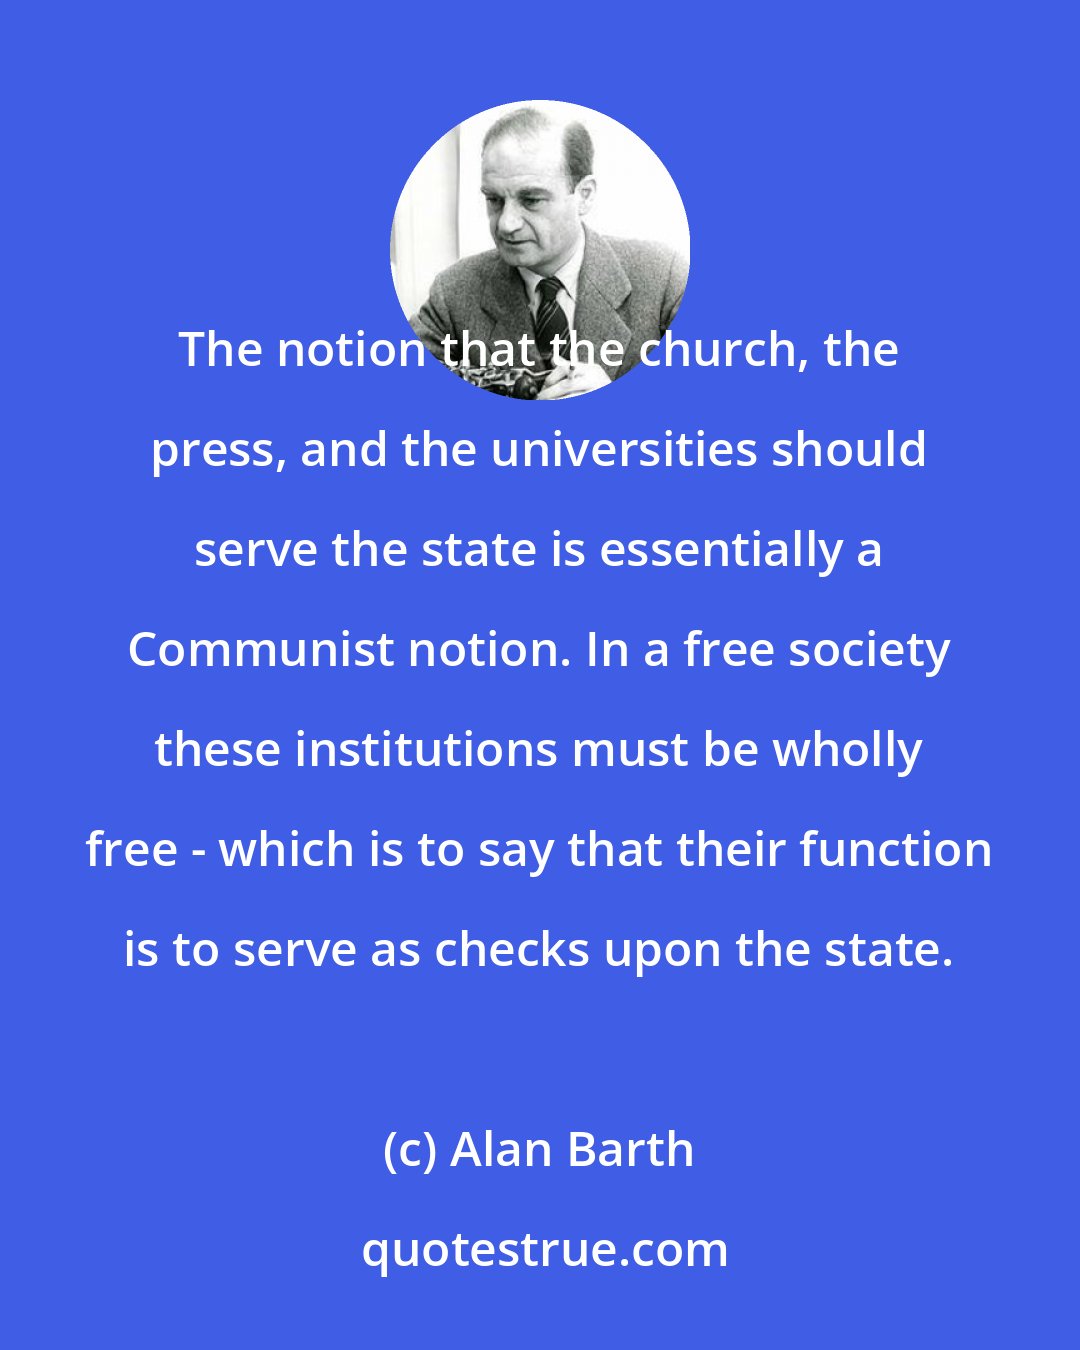 Alan Barth: The notion that the church, the press, and the universities should serve the state is essentially a Communist notion. In a free society these institutions must be wholly free - which is to say that their function is to serve as checks upon the state.